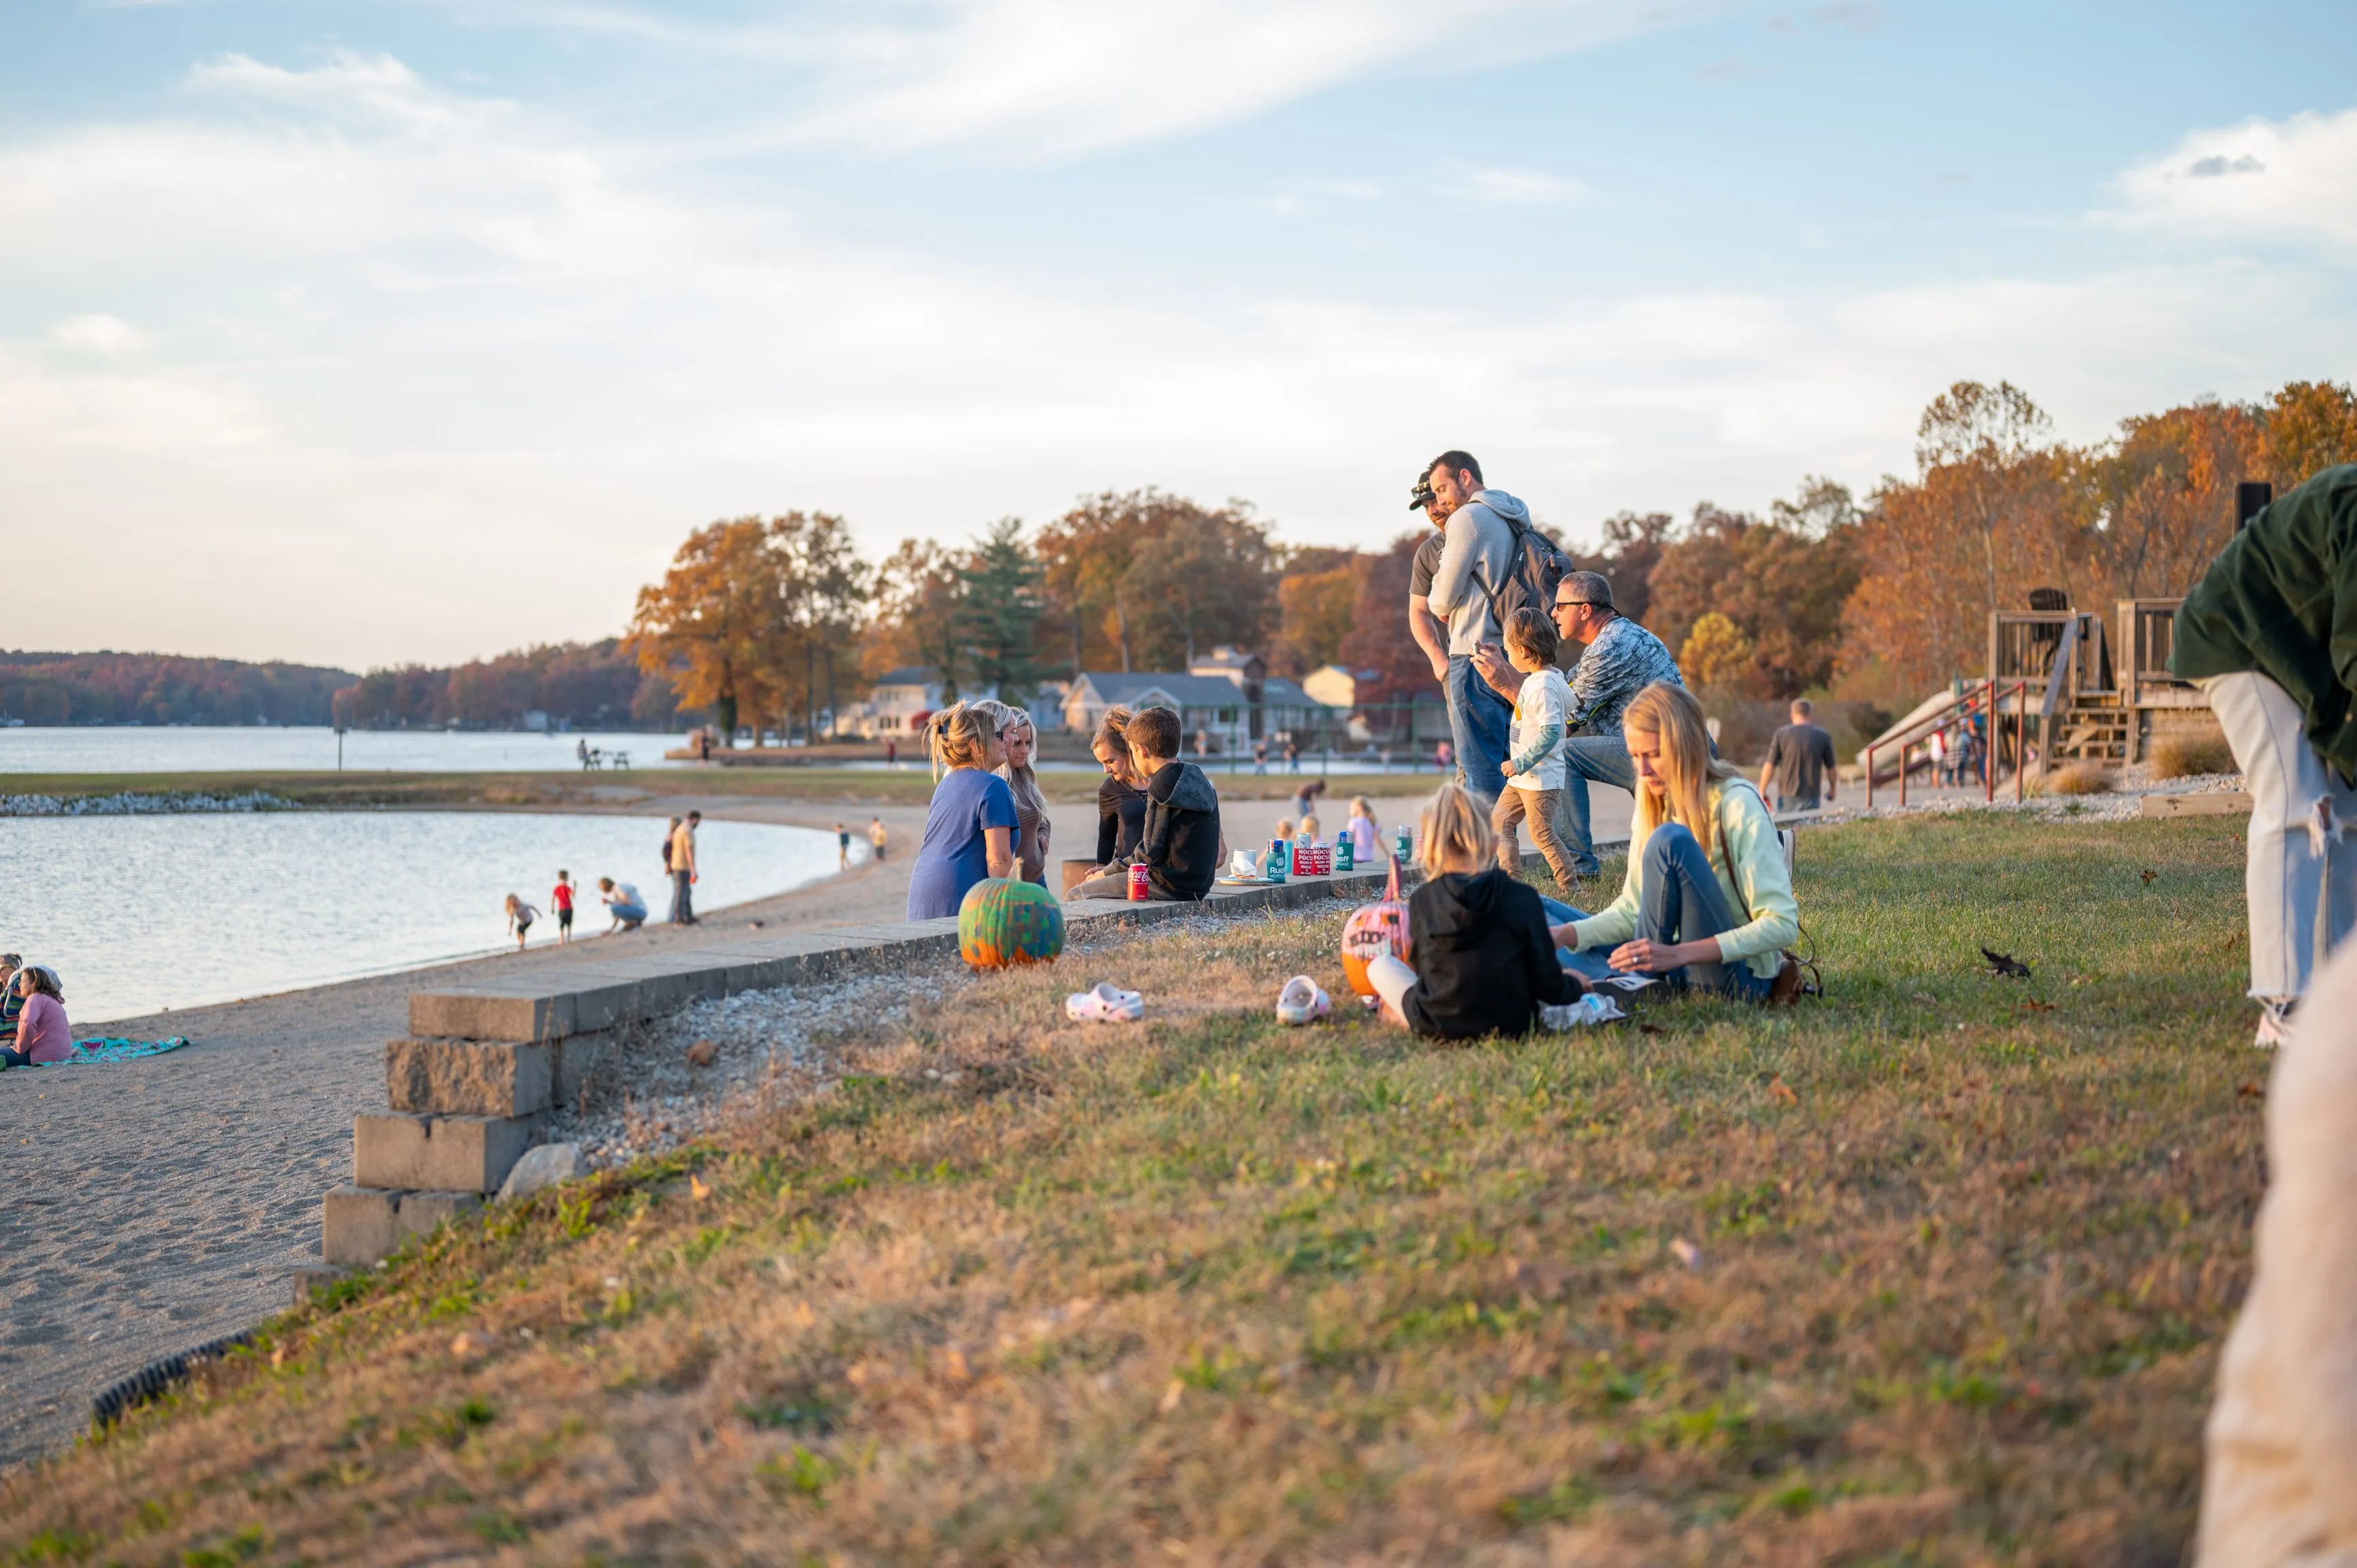 People enjoying a sunny day at a lakeside park with some sitting on the grass and others standing.